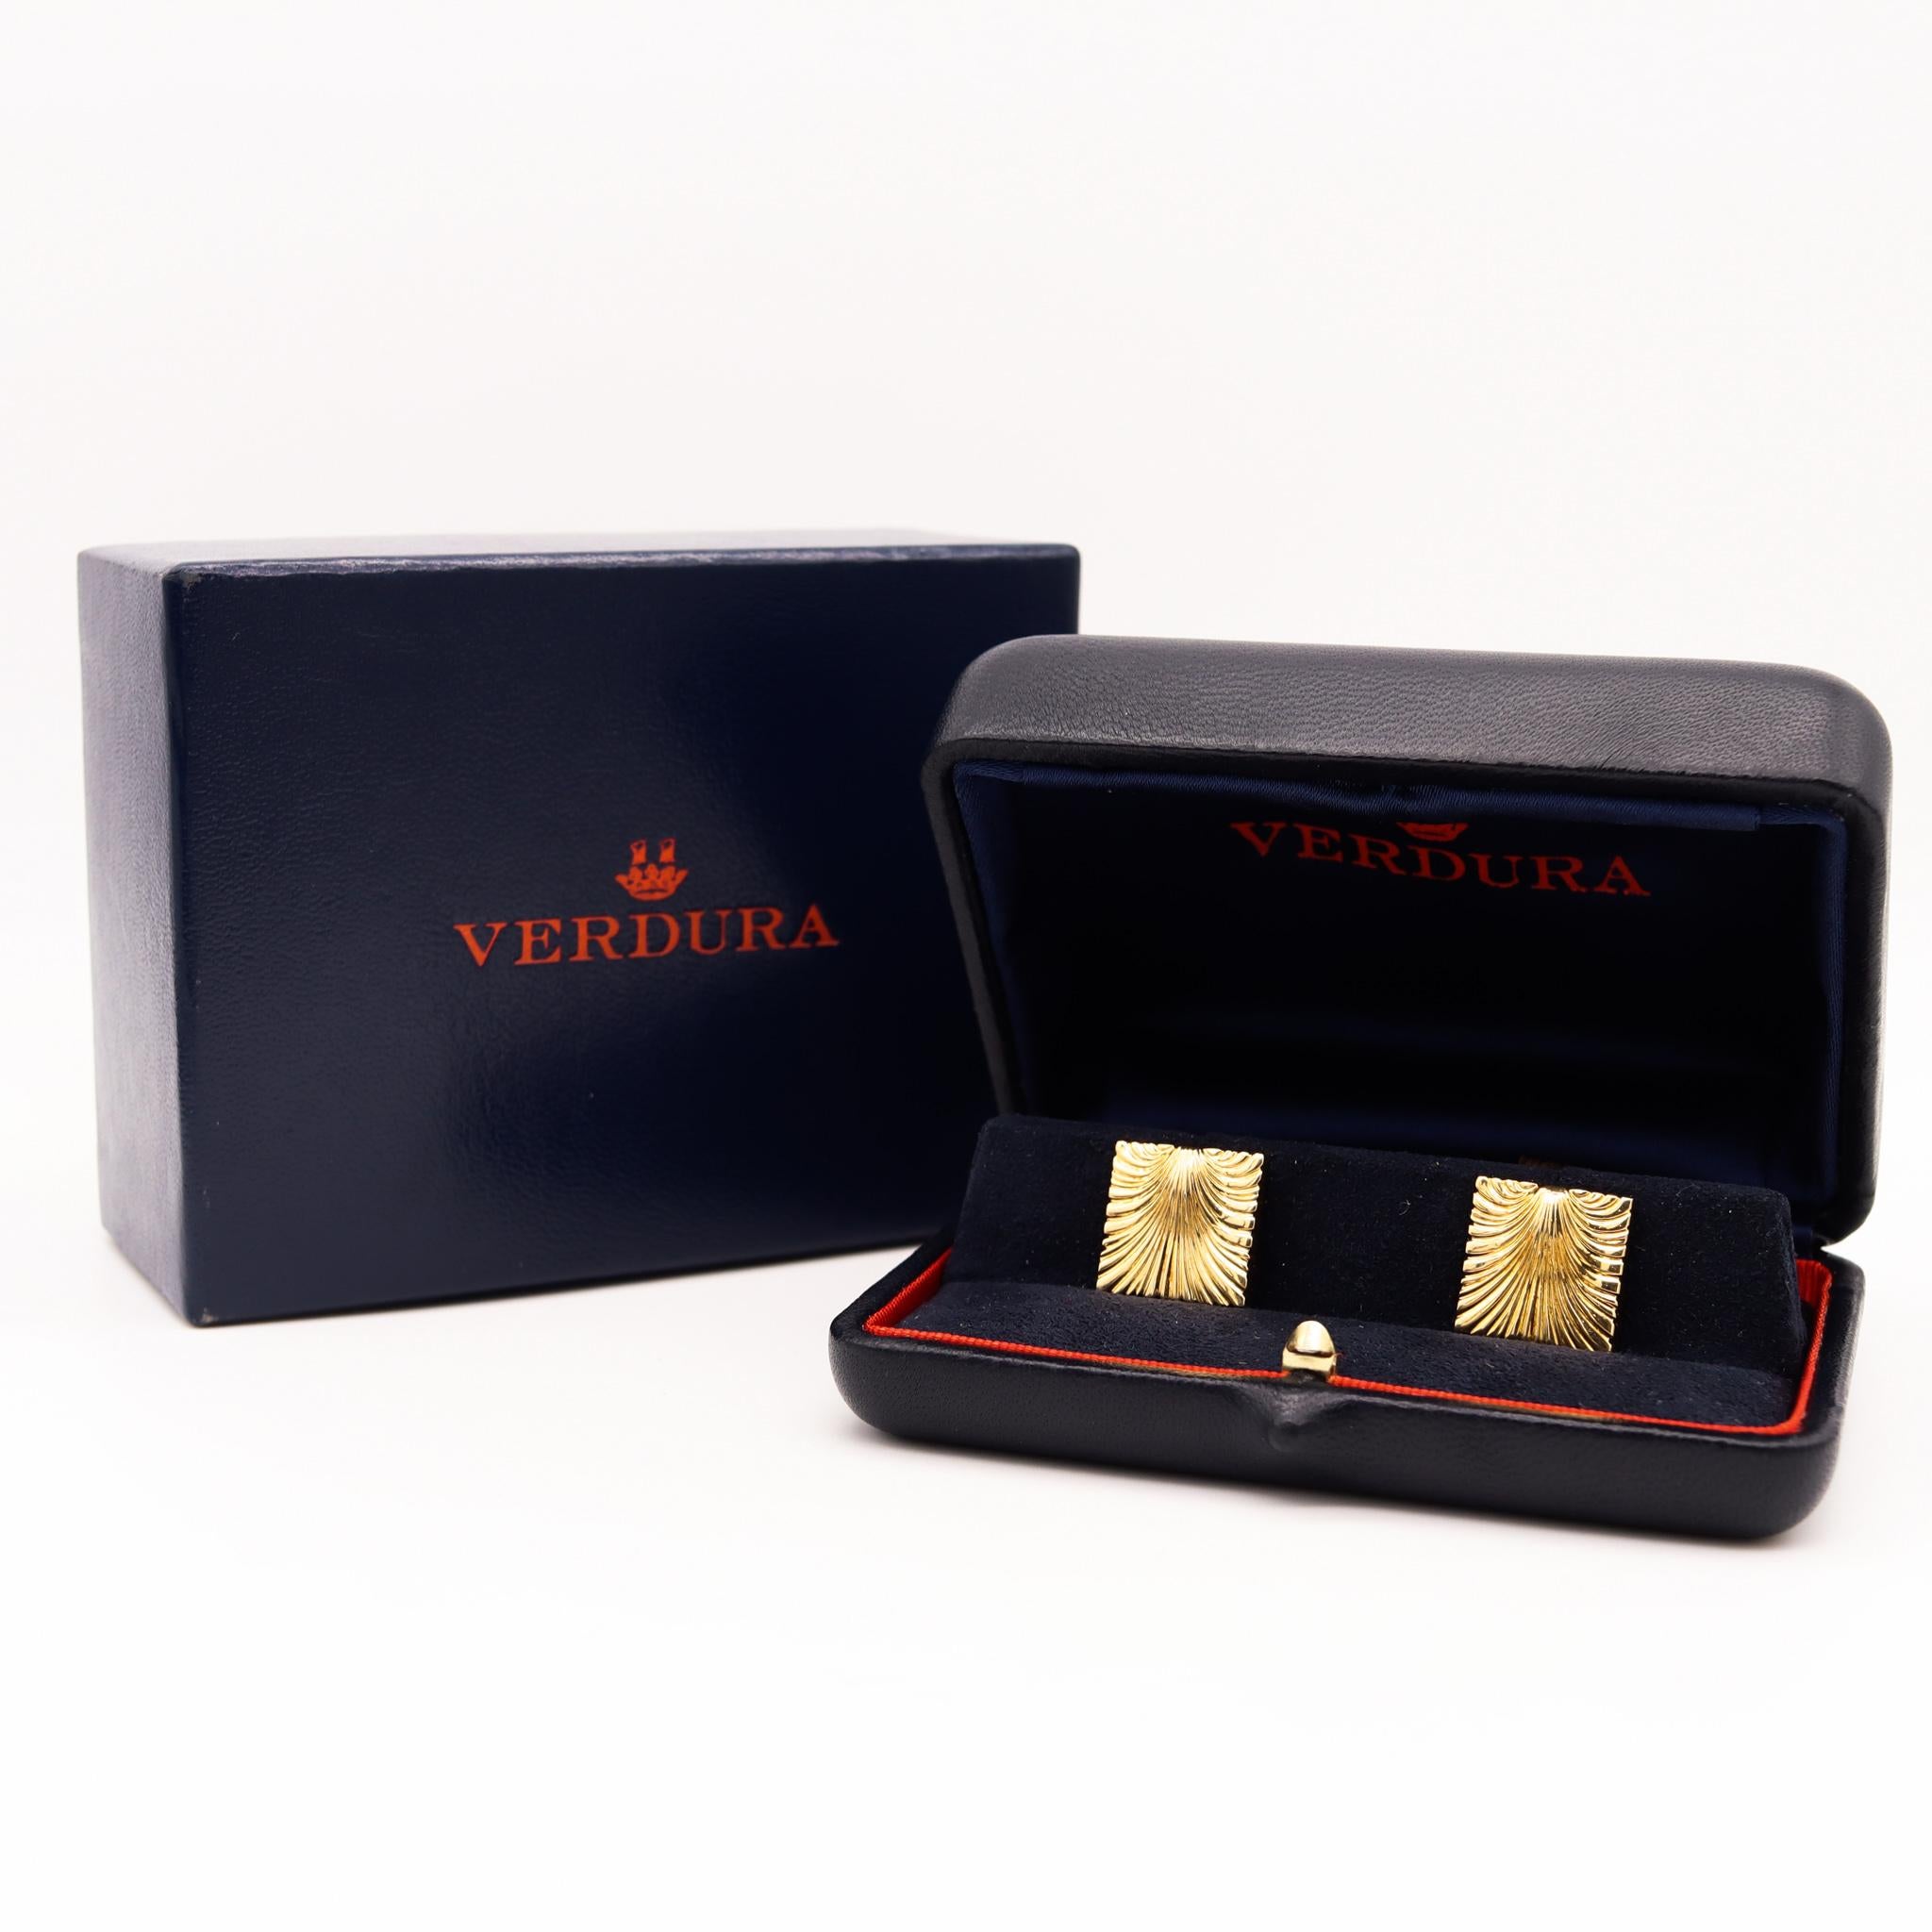 Baroque cufflinks designed by Verdura.

A classic iconic pair of cufflinks, created by the renowned jewelry designer of Verdura. These rare shell cufflinks has been first designed in the 1941 and carefully crafted in solid yellow gold of 18 karats,